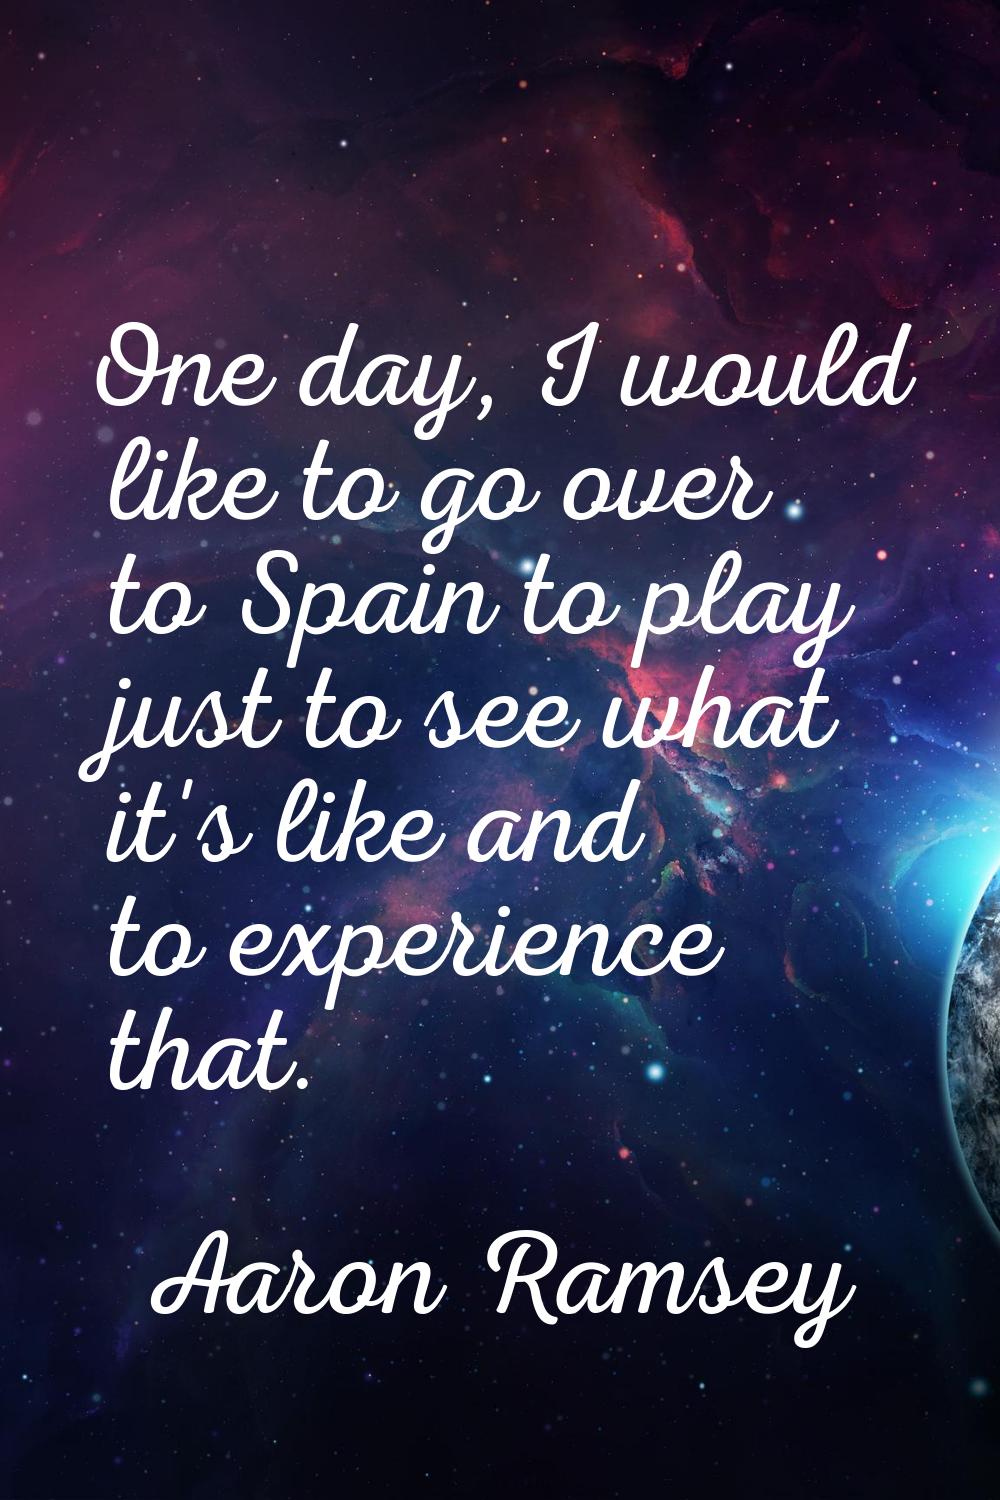 One day, I would like to go over to Spain to play just to see what it's like and to experience that